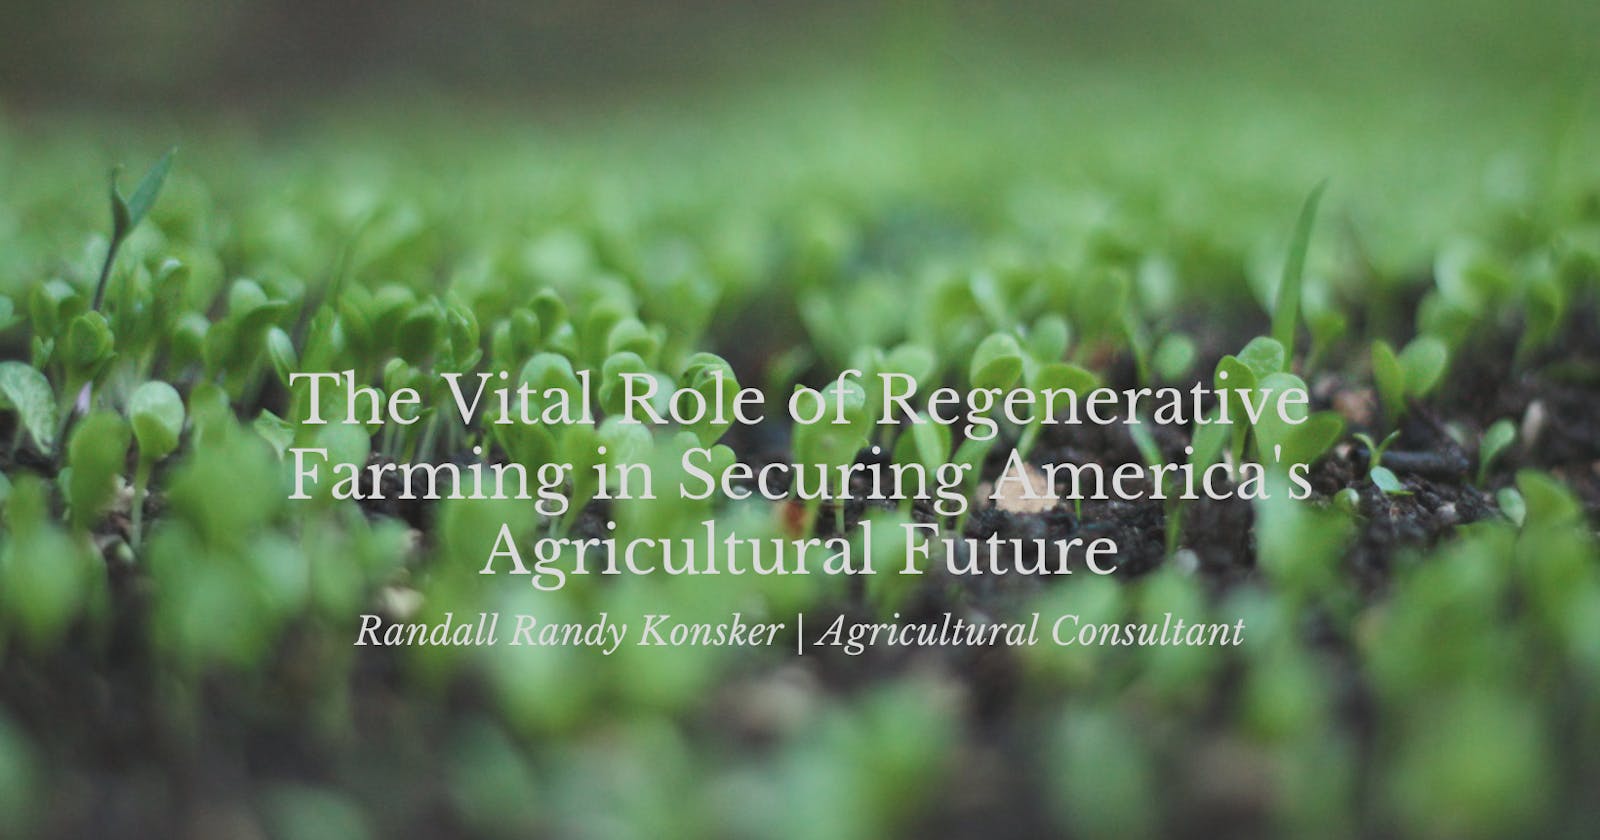 The Vital Role of Regenerative Farming in Securing America's Agricultural Future